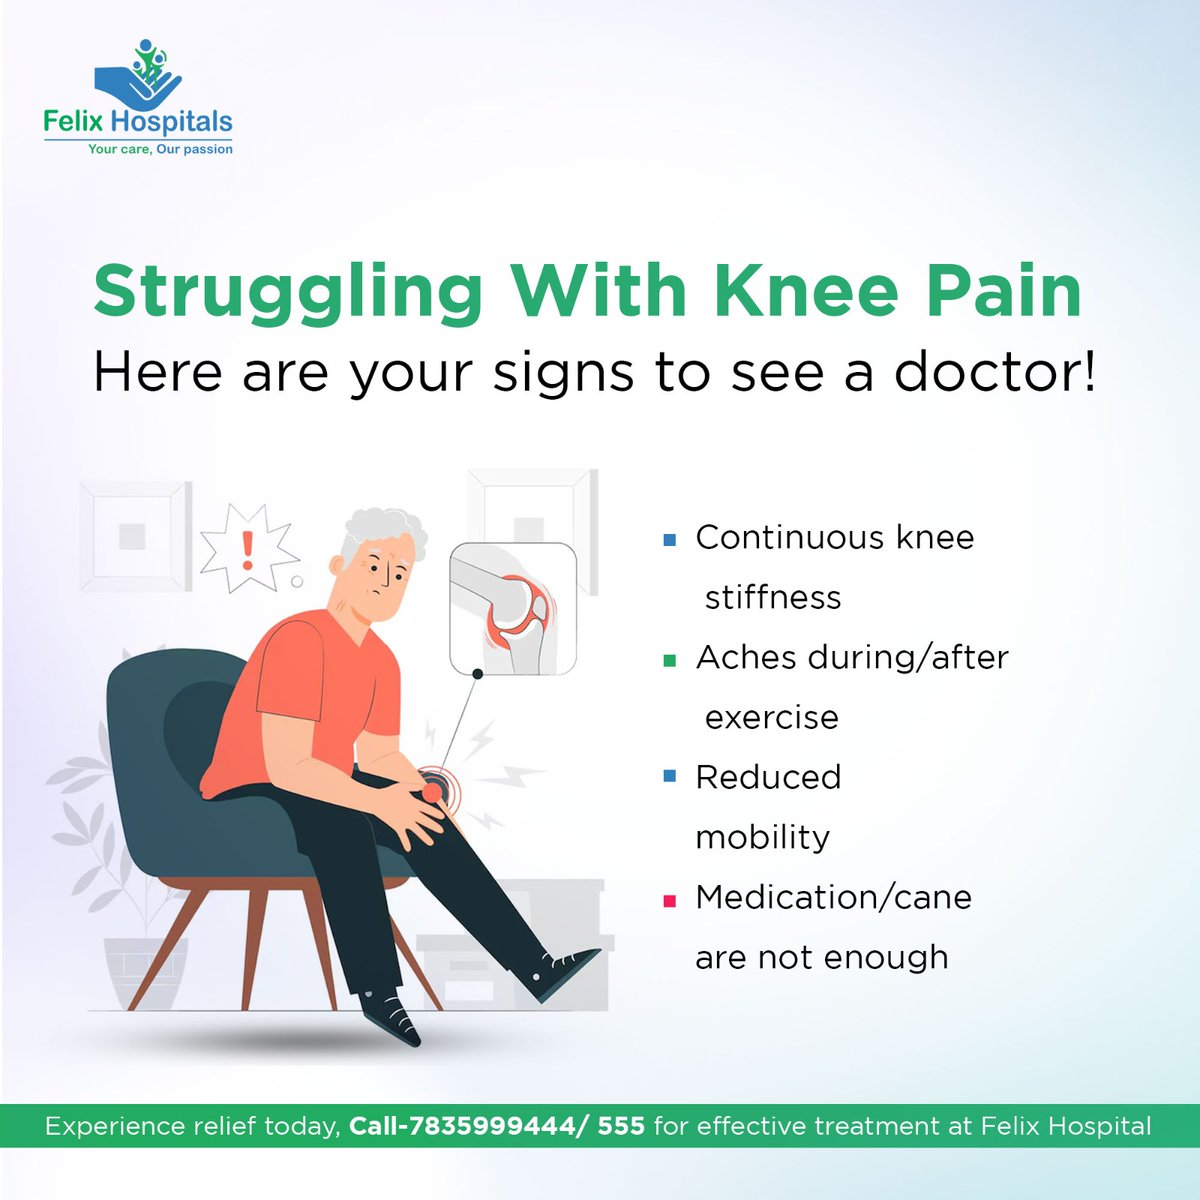 Goodbye knee pain, hello freedom! 🎉 Listen to your knees and prioritize healing. Experiencing signs of trouble? Let's talk about restoring comfort and mobility.📷 #FreedomFromKneePain #KneeCare #knee #kneepain #kneereplacement #hospitalnear #healthiswealth2024 #HealthCheckup